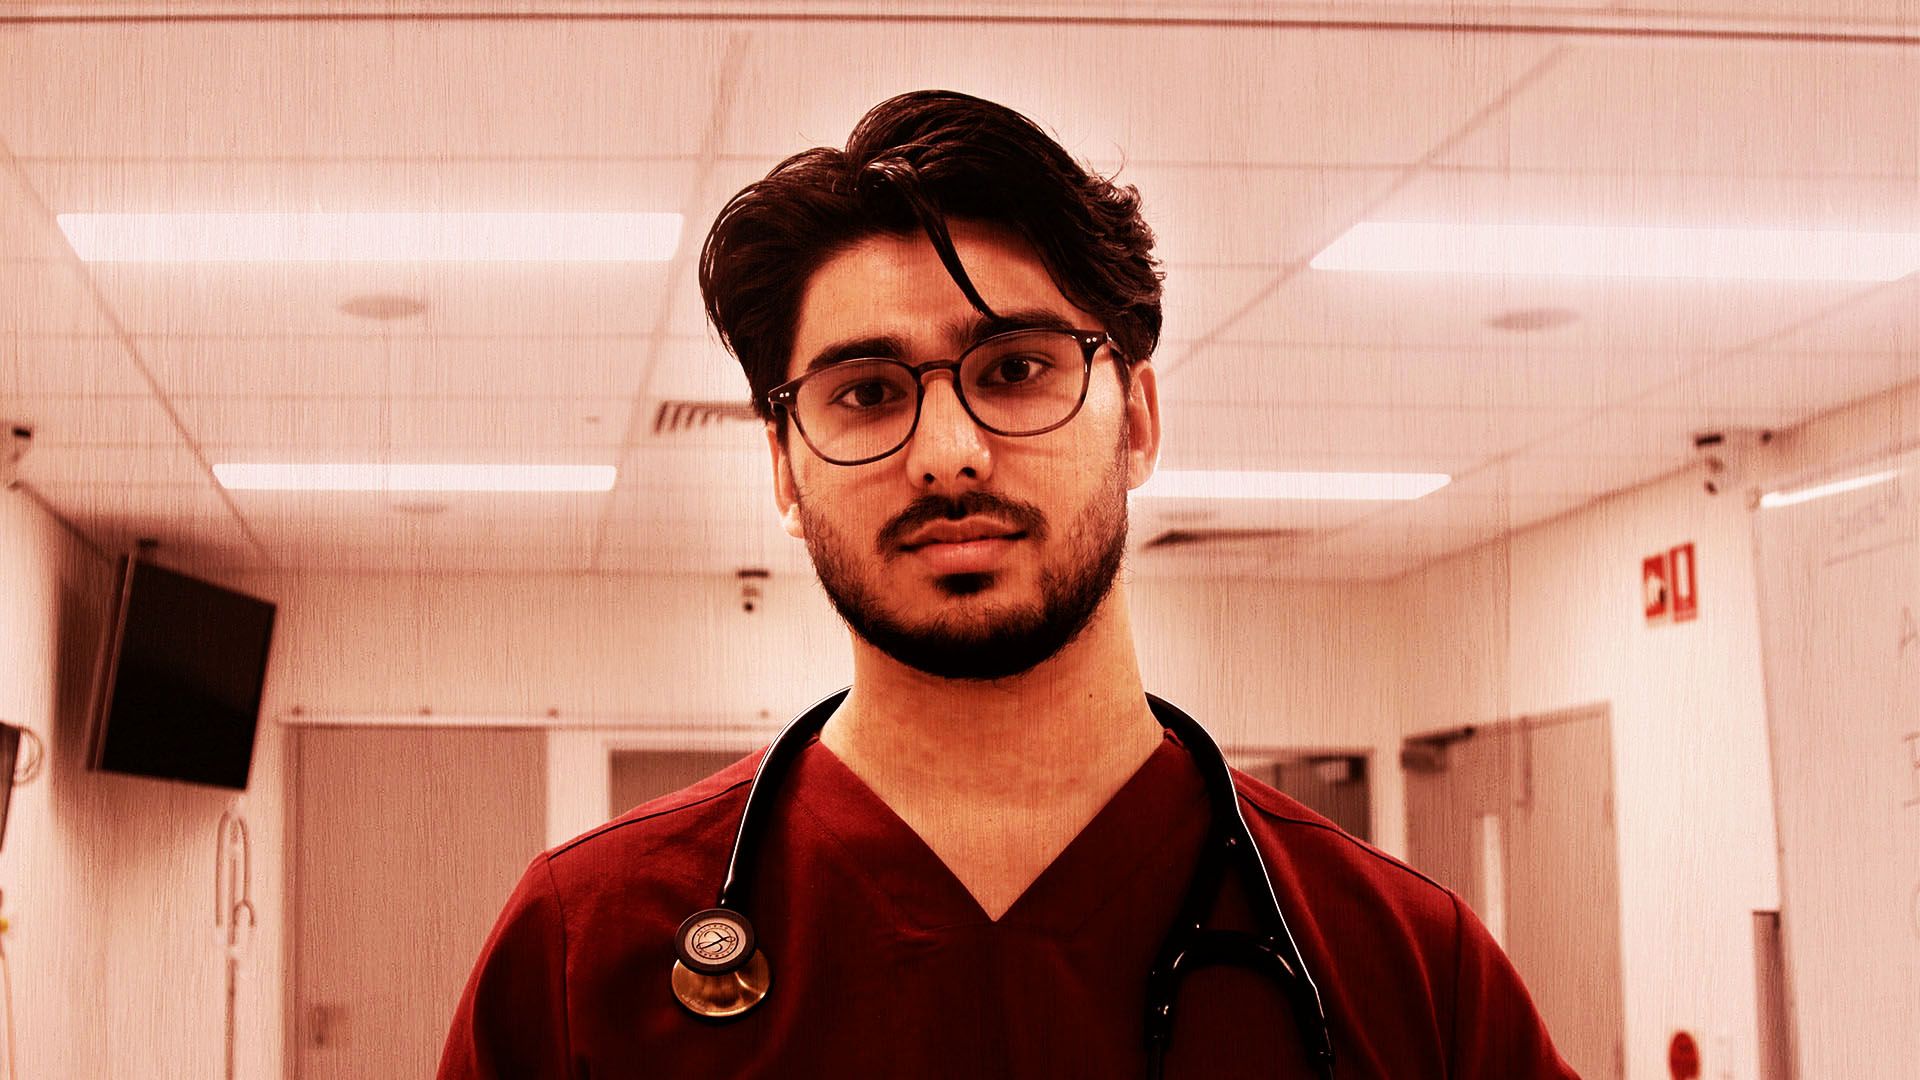 Summer Season: An aspiring doctor from the ’burbs takes on medical schools for elitism